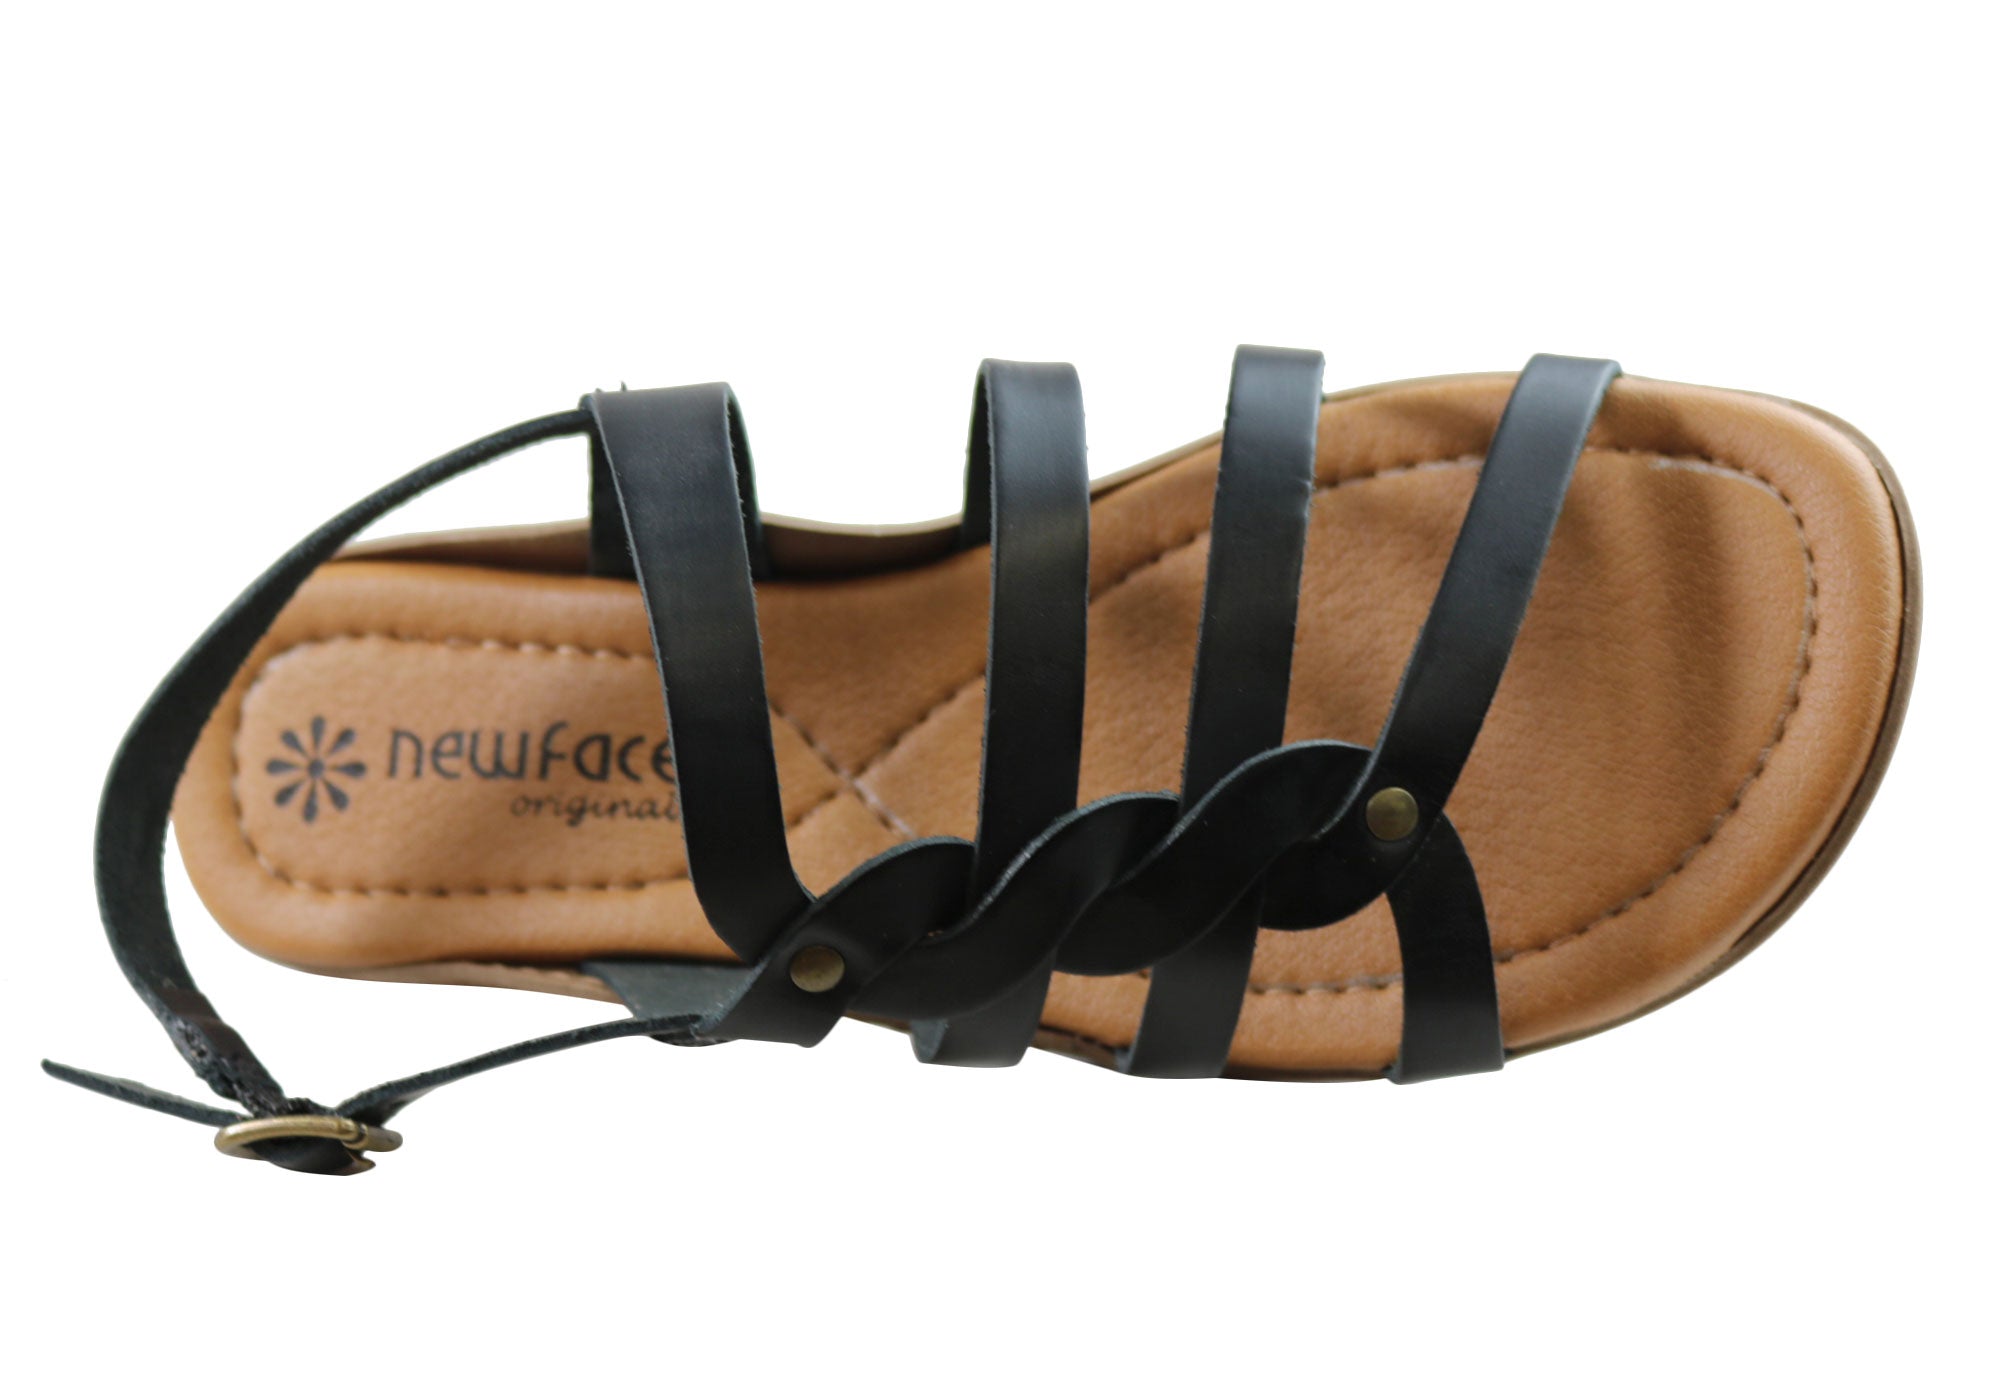 New Face Estella Womens Comfortable Leather Sandals Made In Brazil